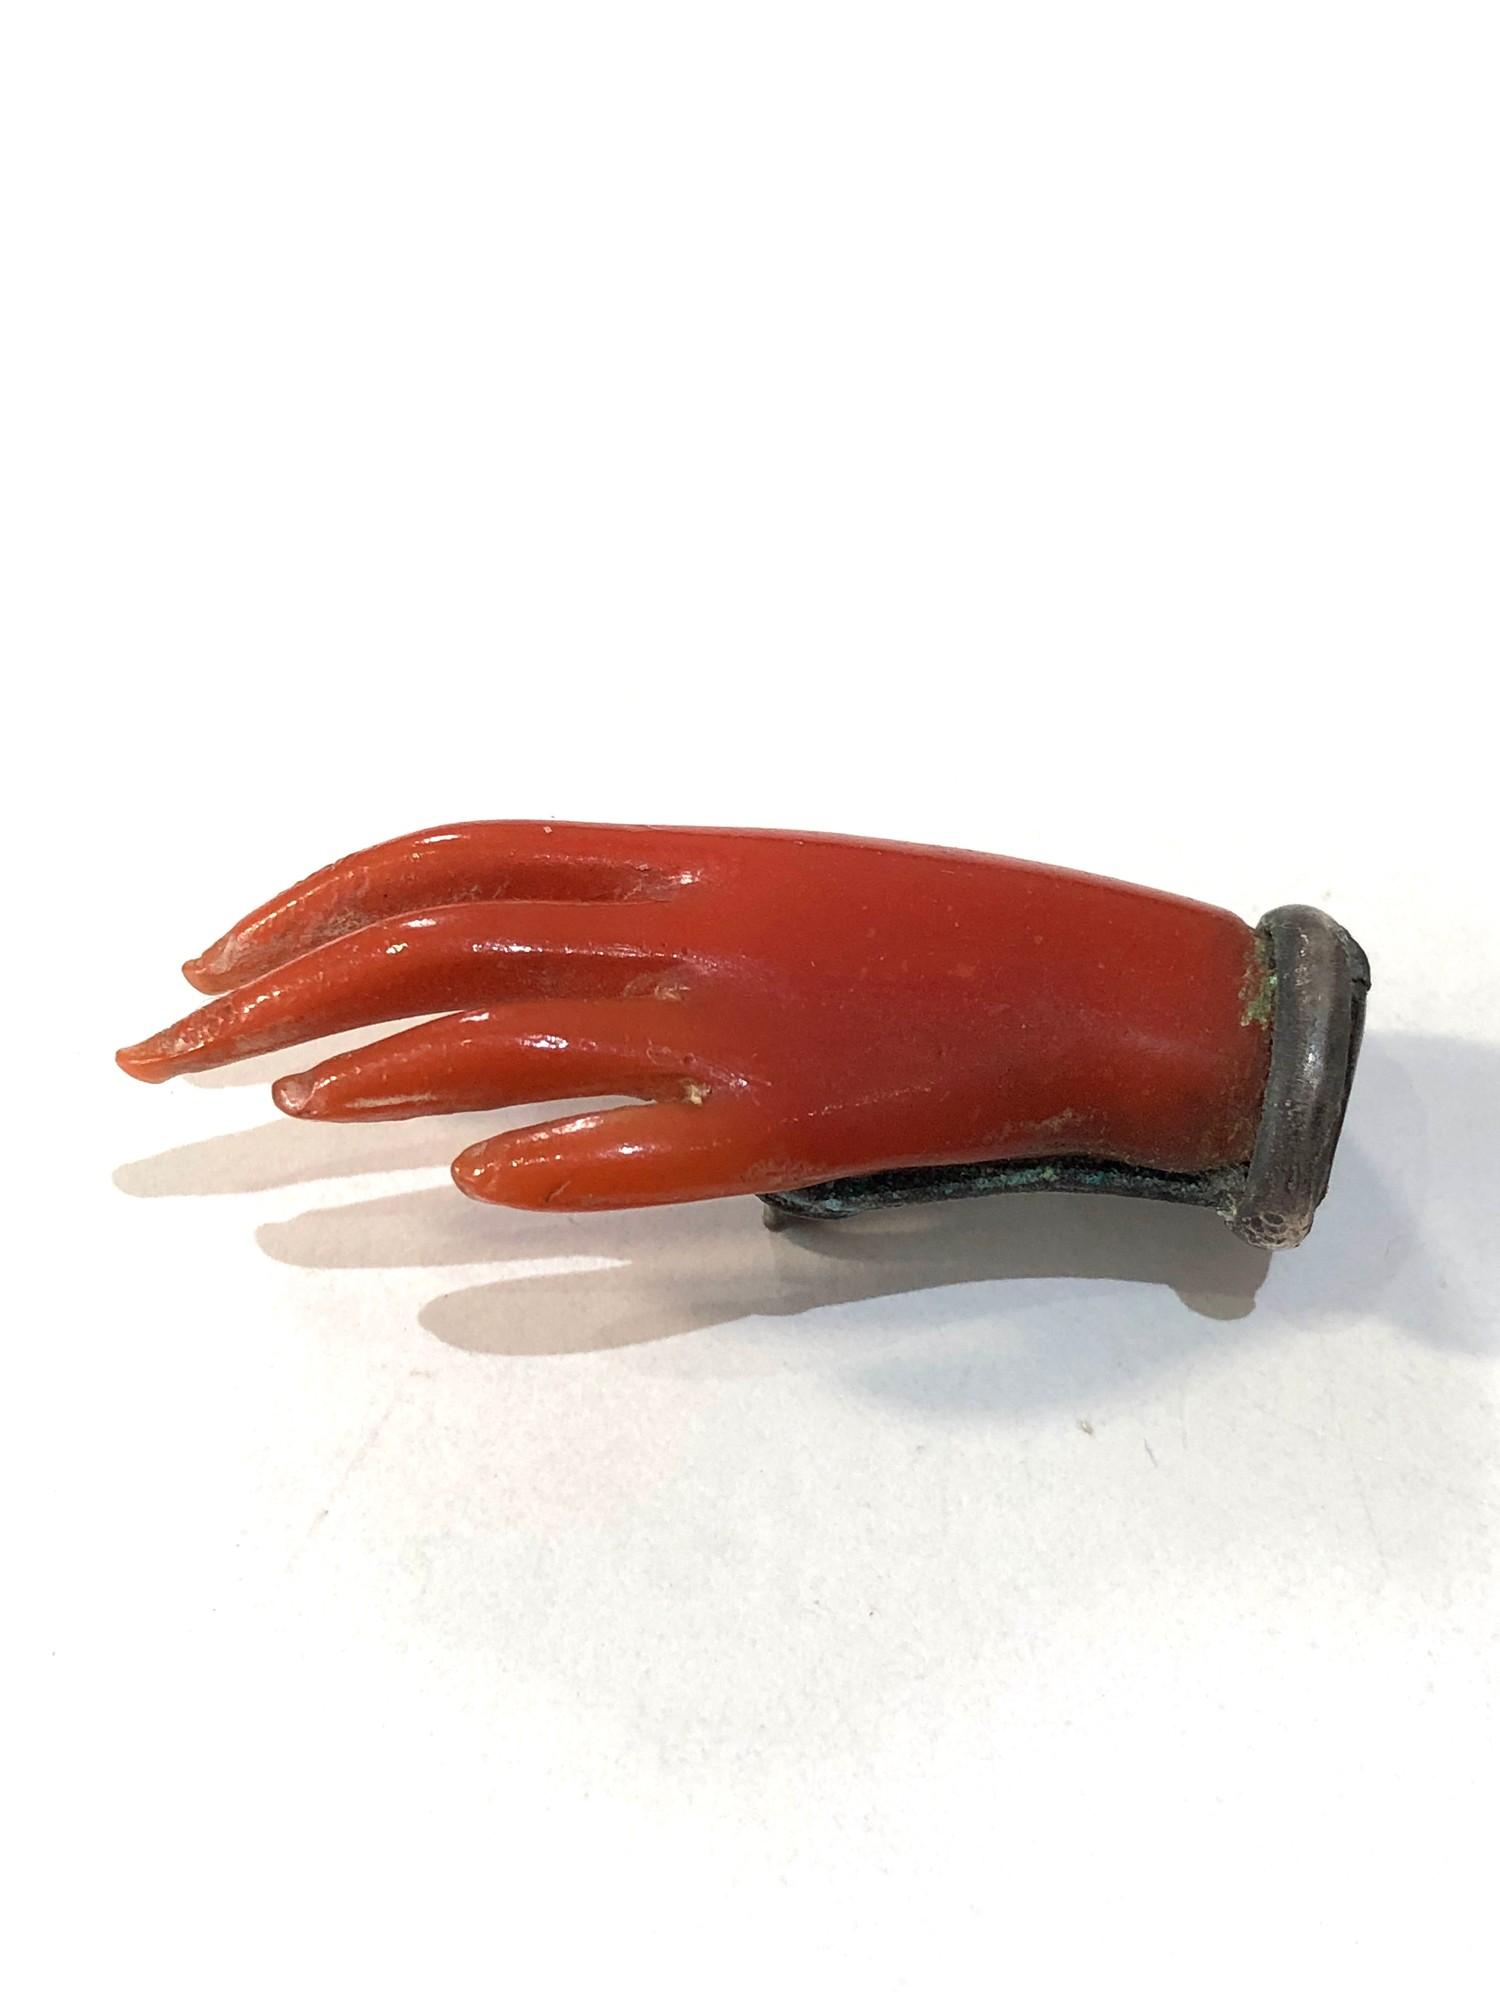 Vintage large coral hand brooch age related marks scratches and wear to hand missing pin back in - Image 2 of 4